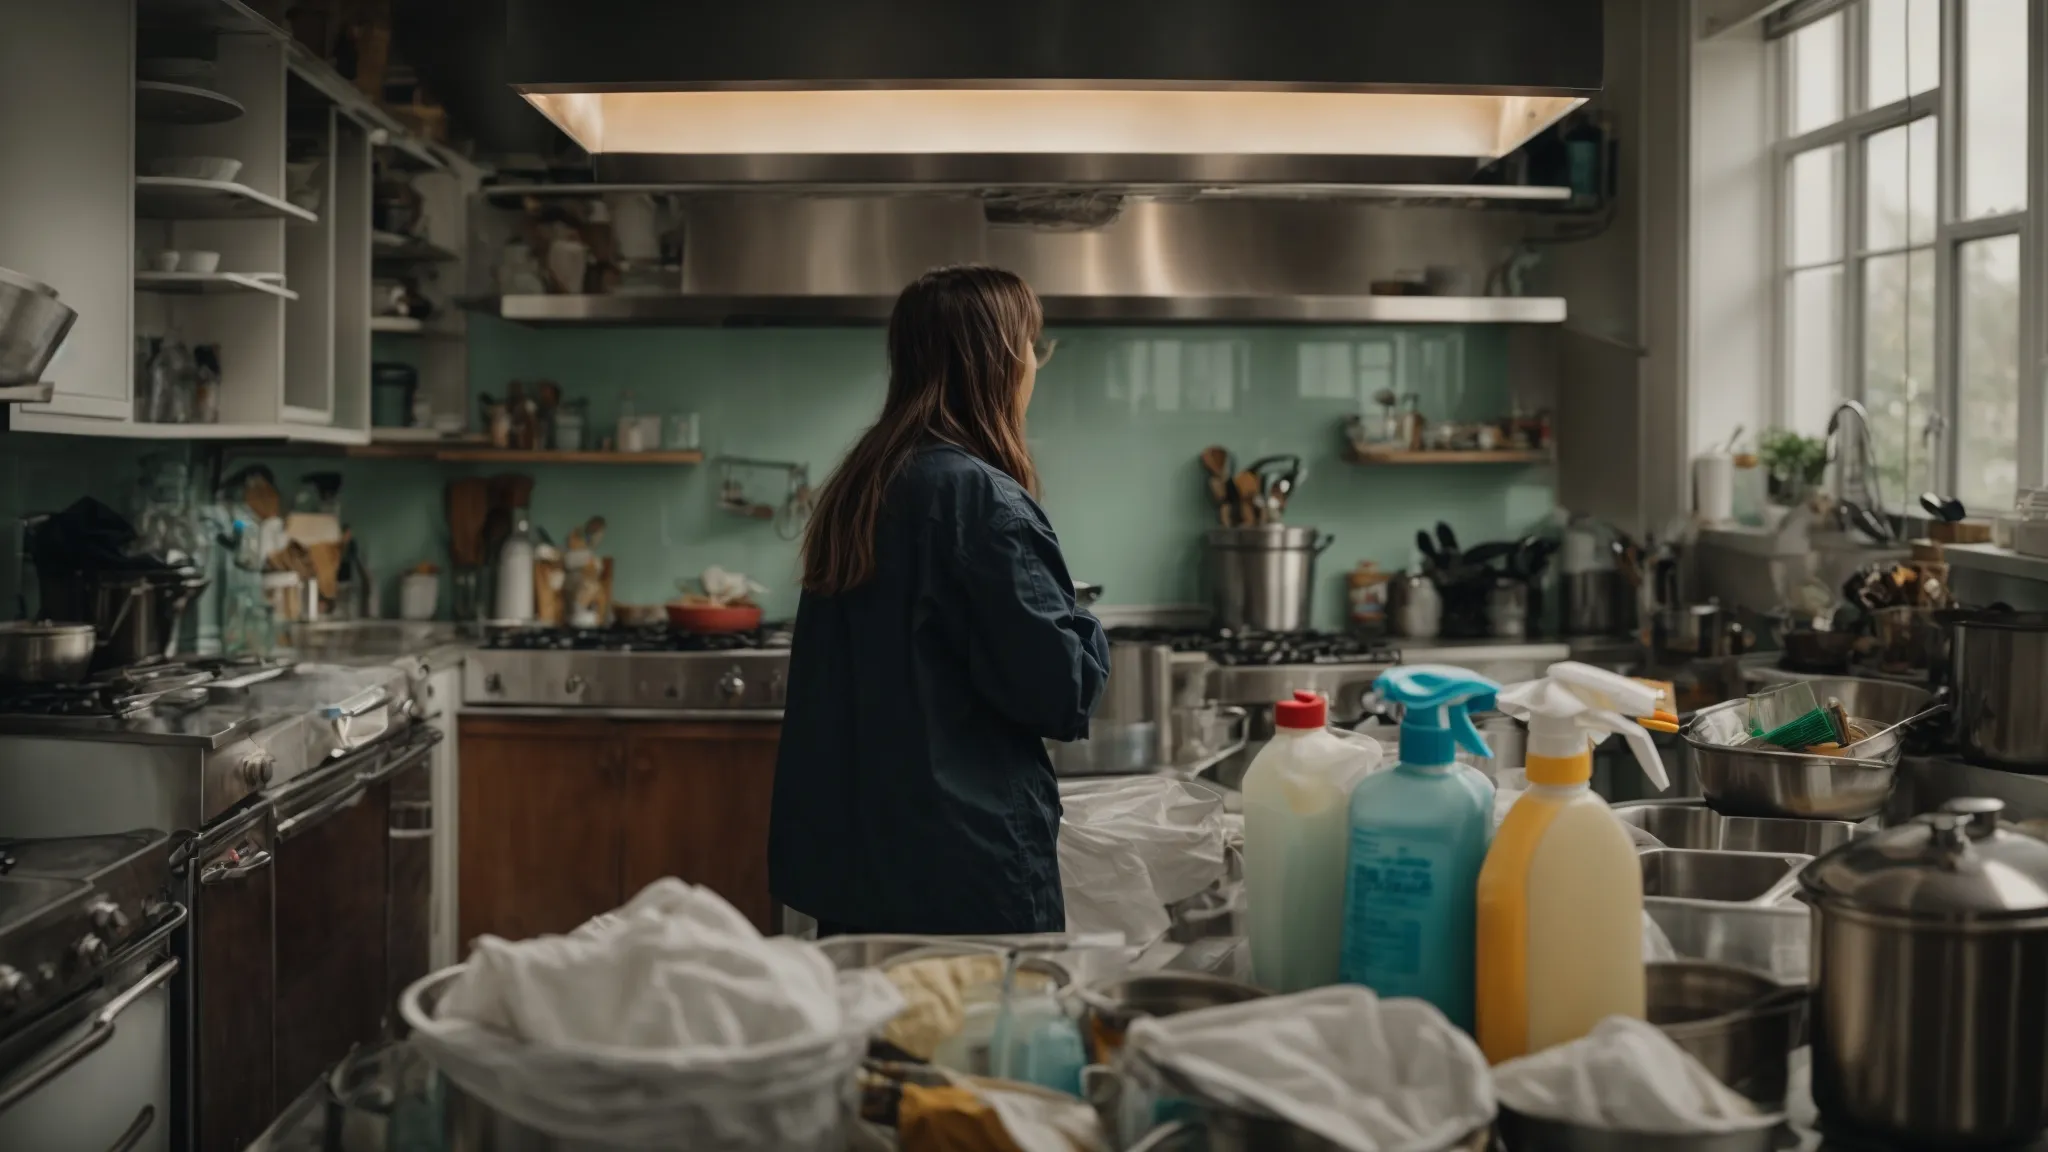 a person stands in a kitchen, surrounded by various cleaning supplies, ready to tackle the grease-laden Toronto Hood Cleaning exhaust hood above the stove.